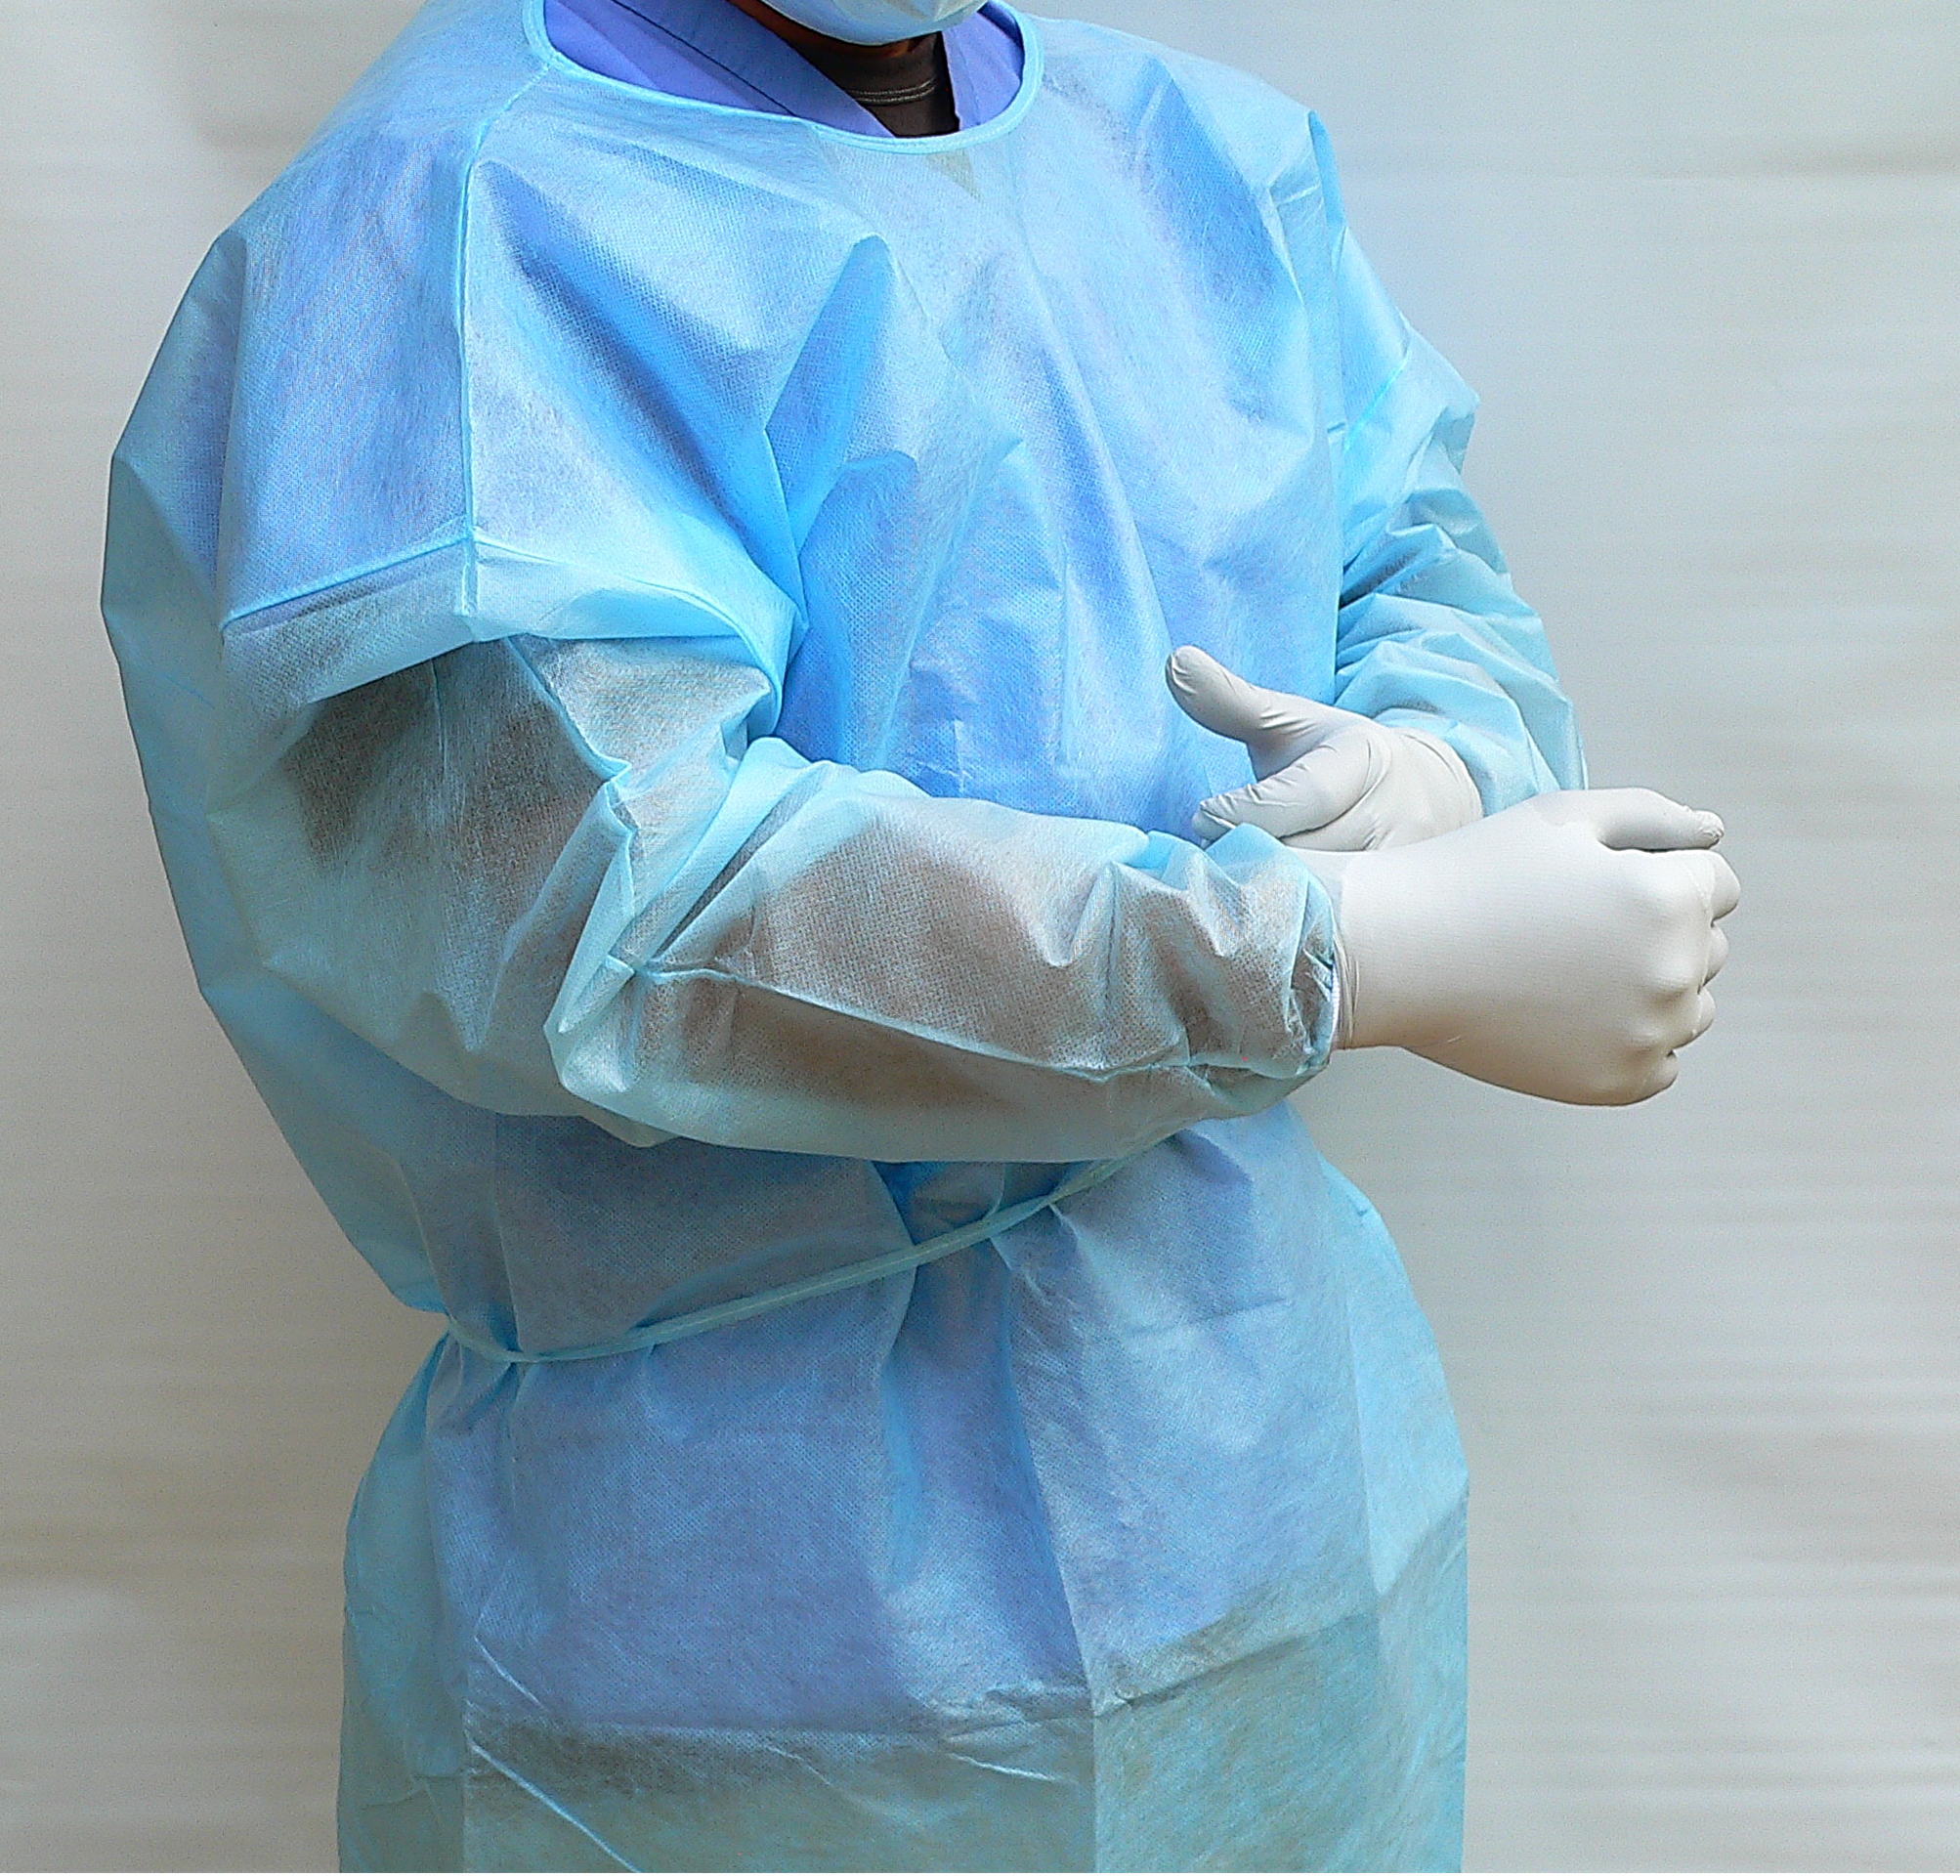 Disposable PE coated level 2 isolation gowns with knit cuffs. Blue color.